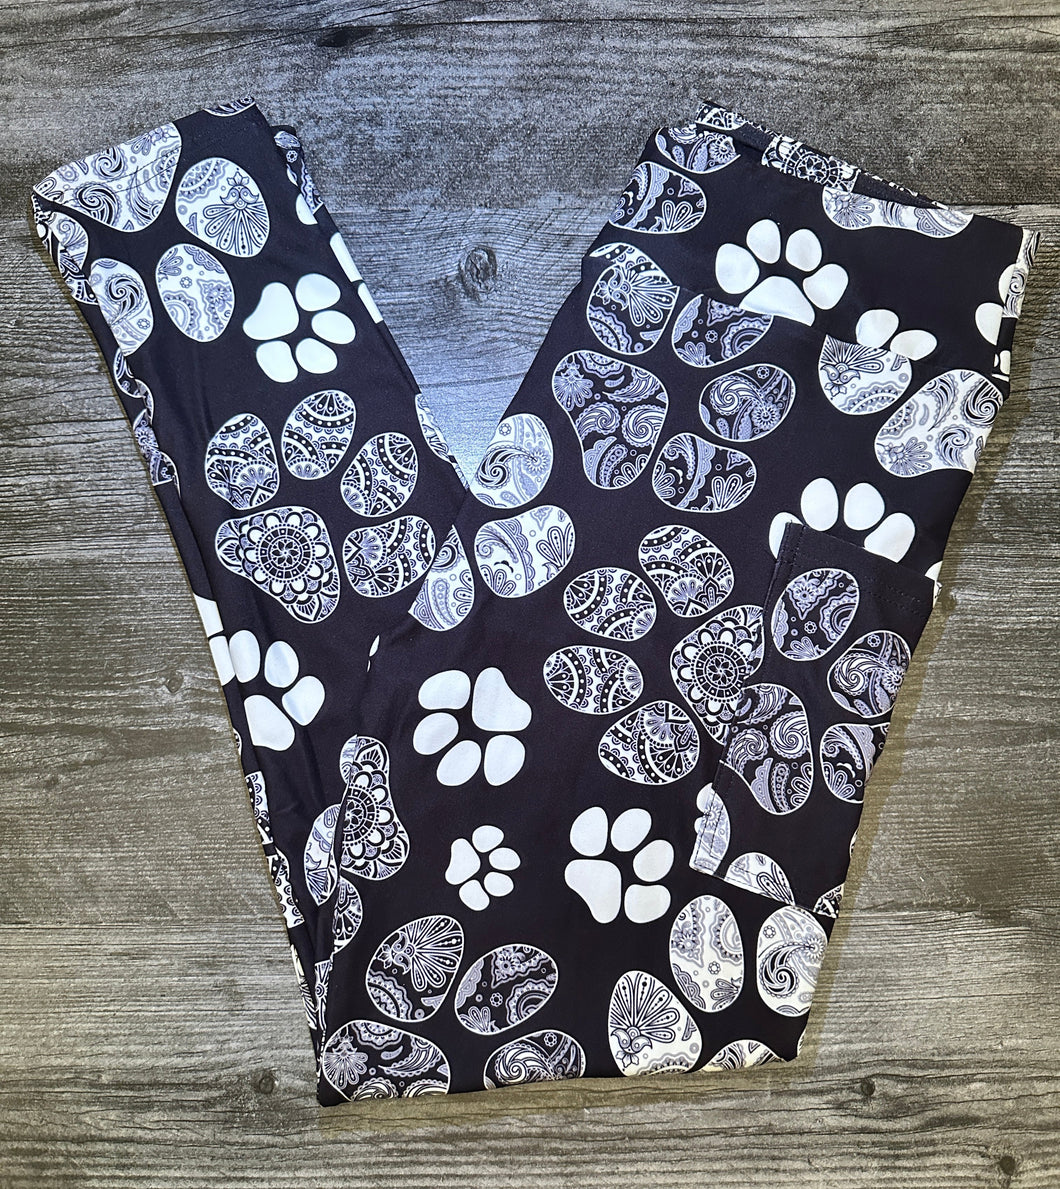 Decorative Paws - Leggings with Pockets